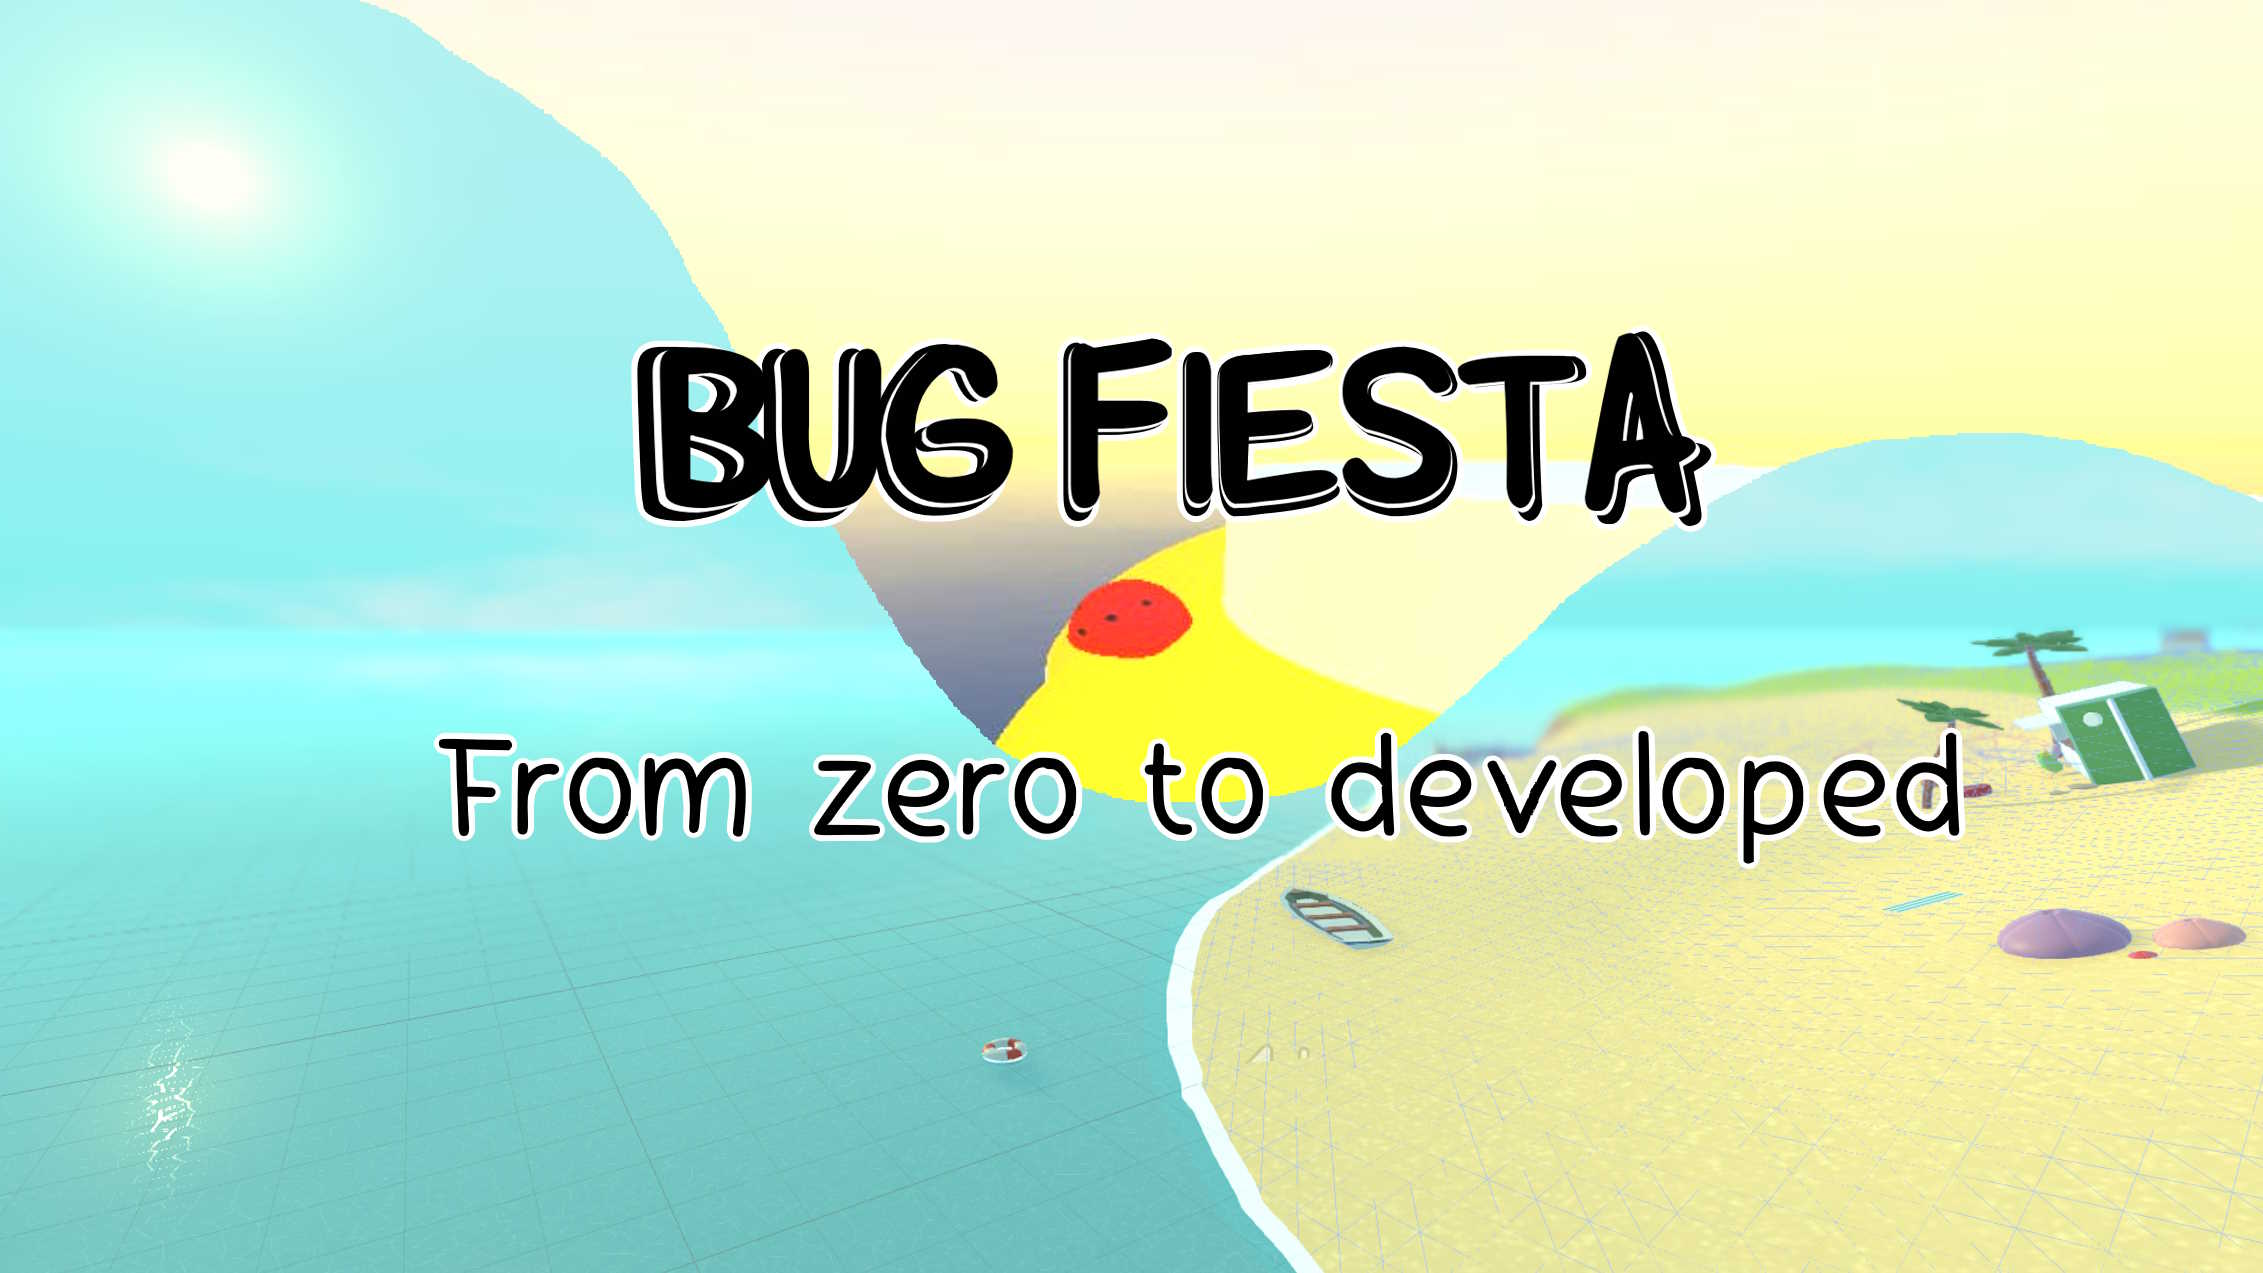 Preview image for Bug Fiesta's video called 'Bug Fiesta: From zero to developed', in which you can observe a splitted image, half of the image with the first previews of the development process and the other half with an image of the finished process.